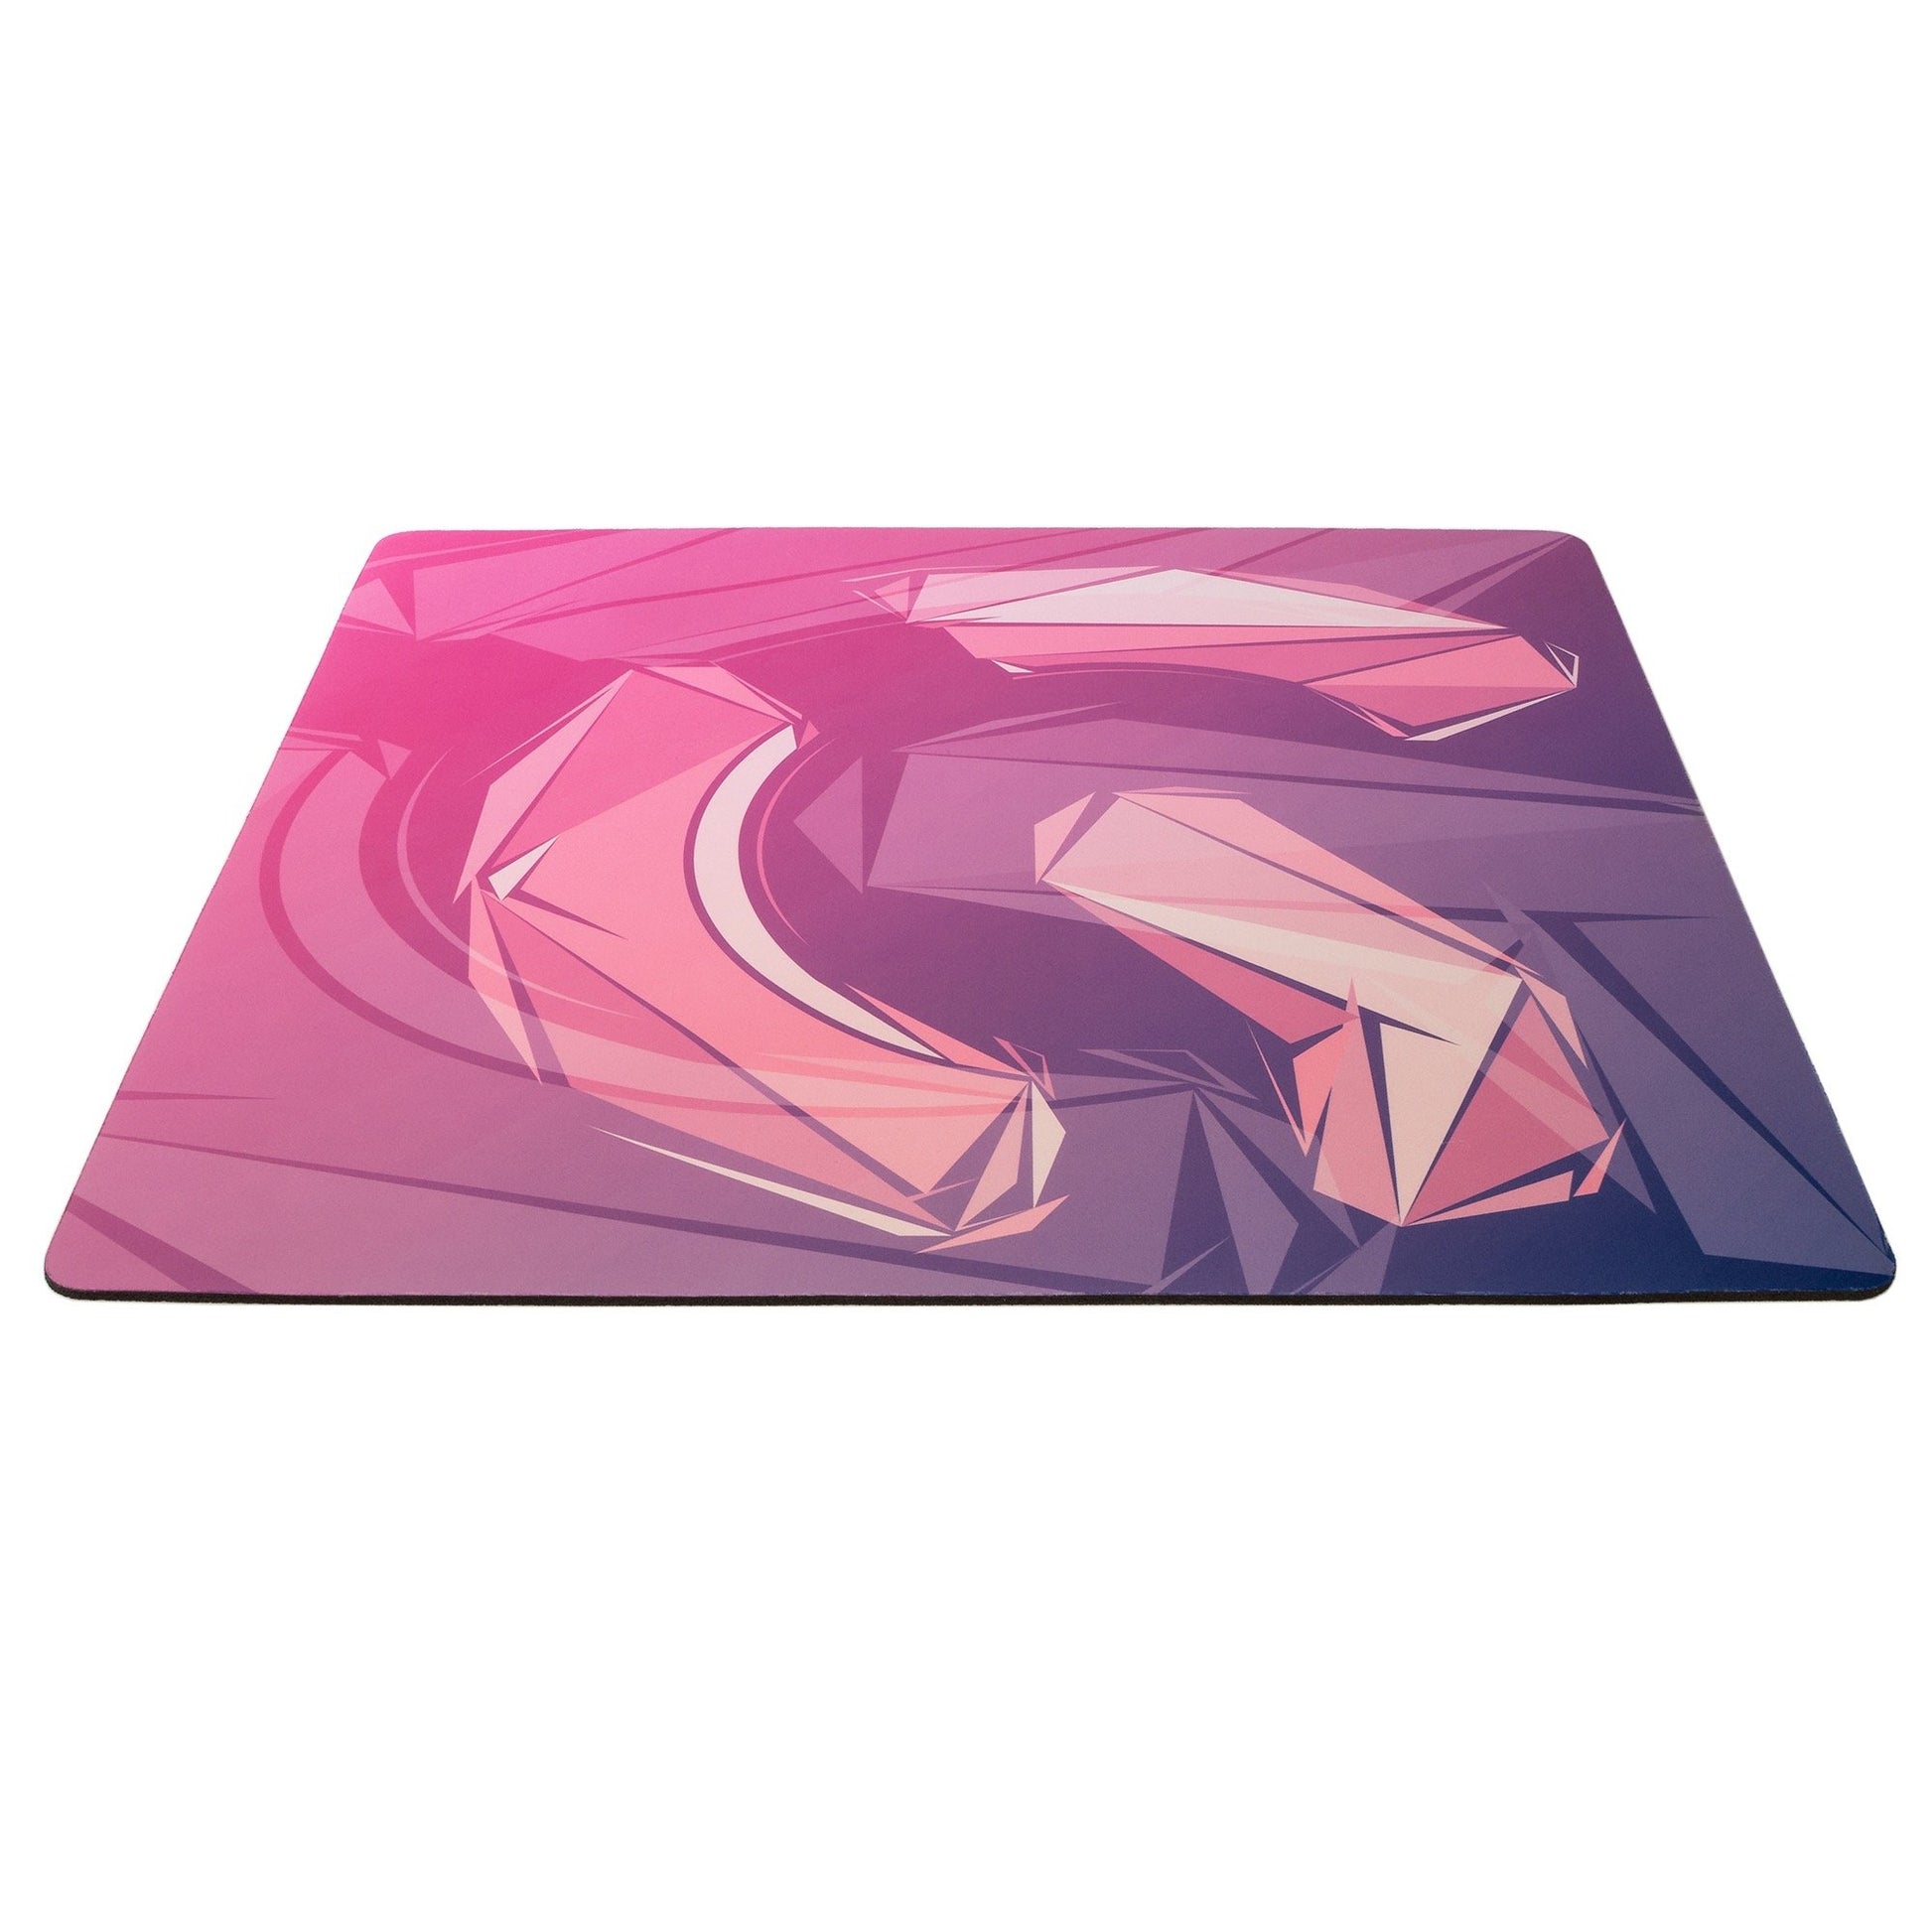 Neon PC Pro 500x500 Gaming Mouse Pad